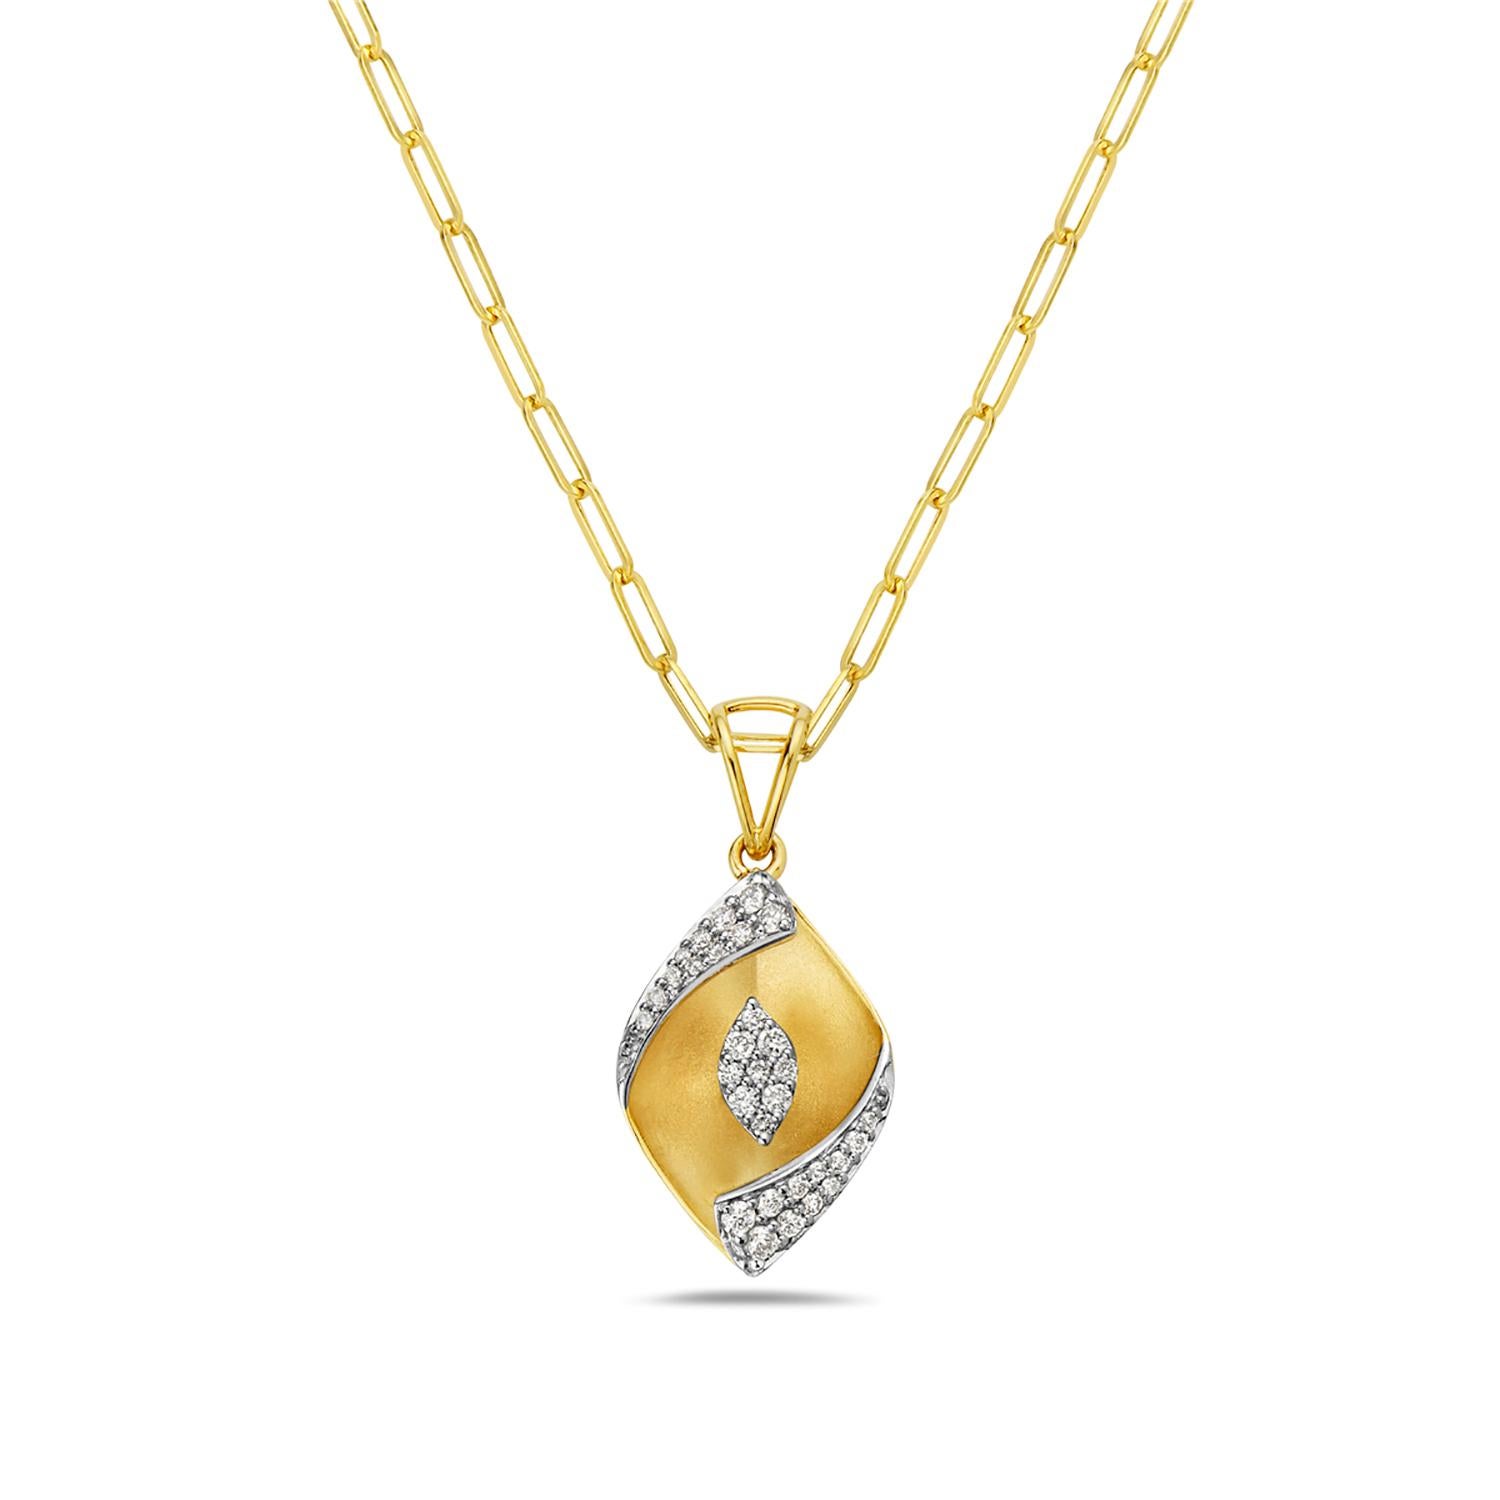 Petal Shaped Pendant with Depth Illusion Paved in Halo Diamonds in 14k Gold In New Condition For Sale In New York, NY